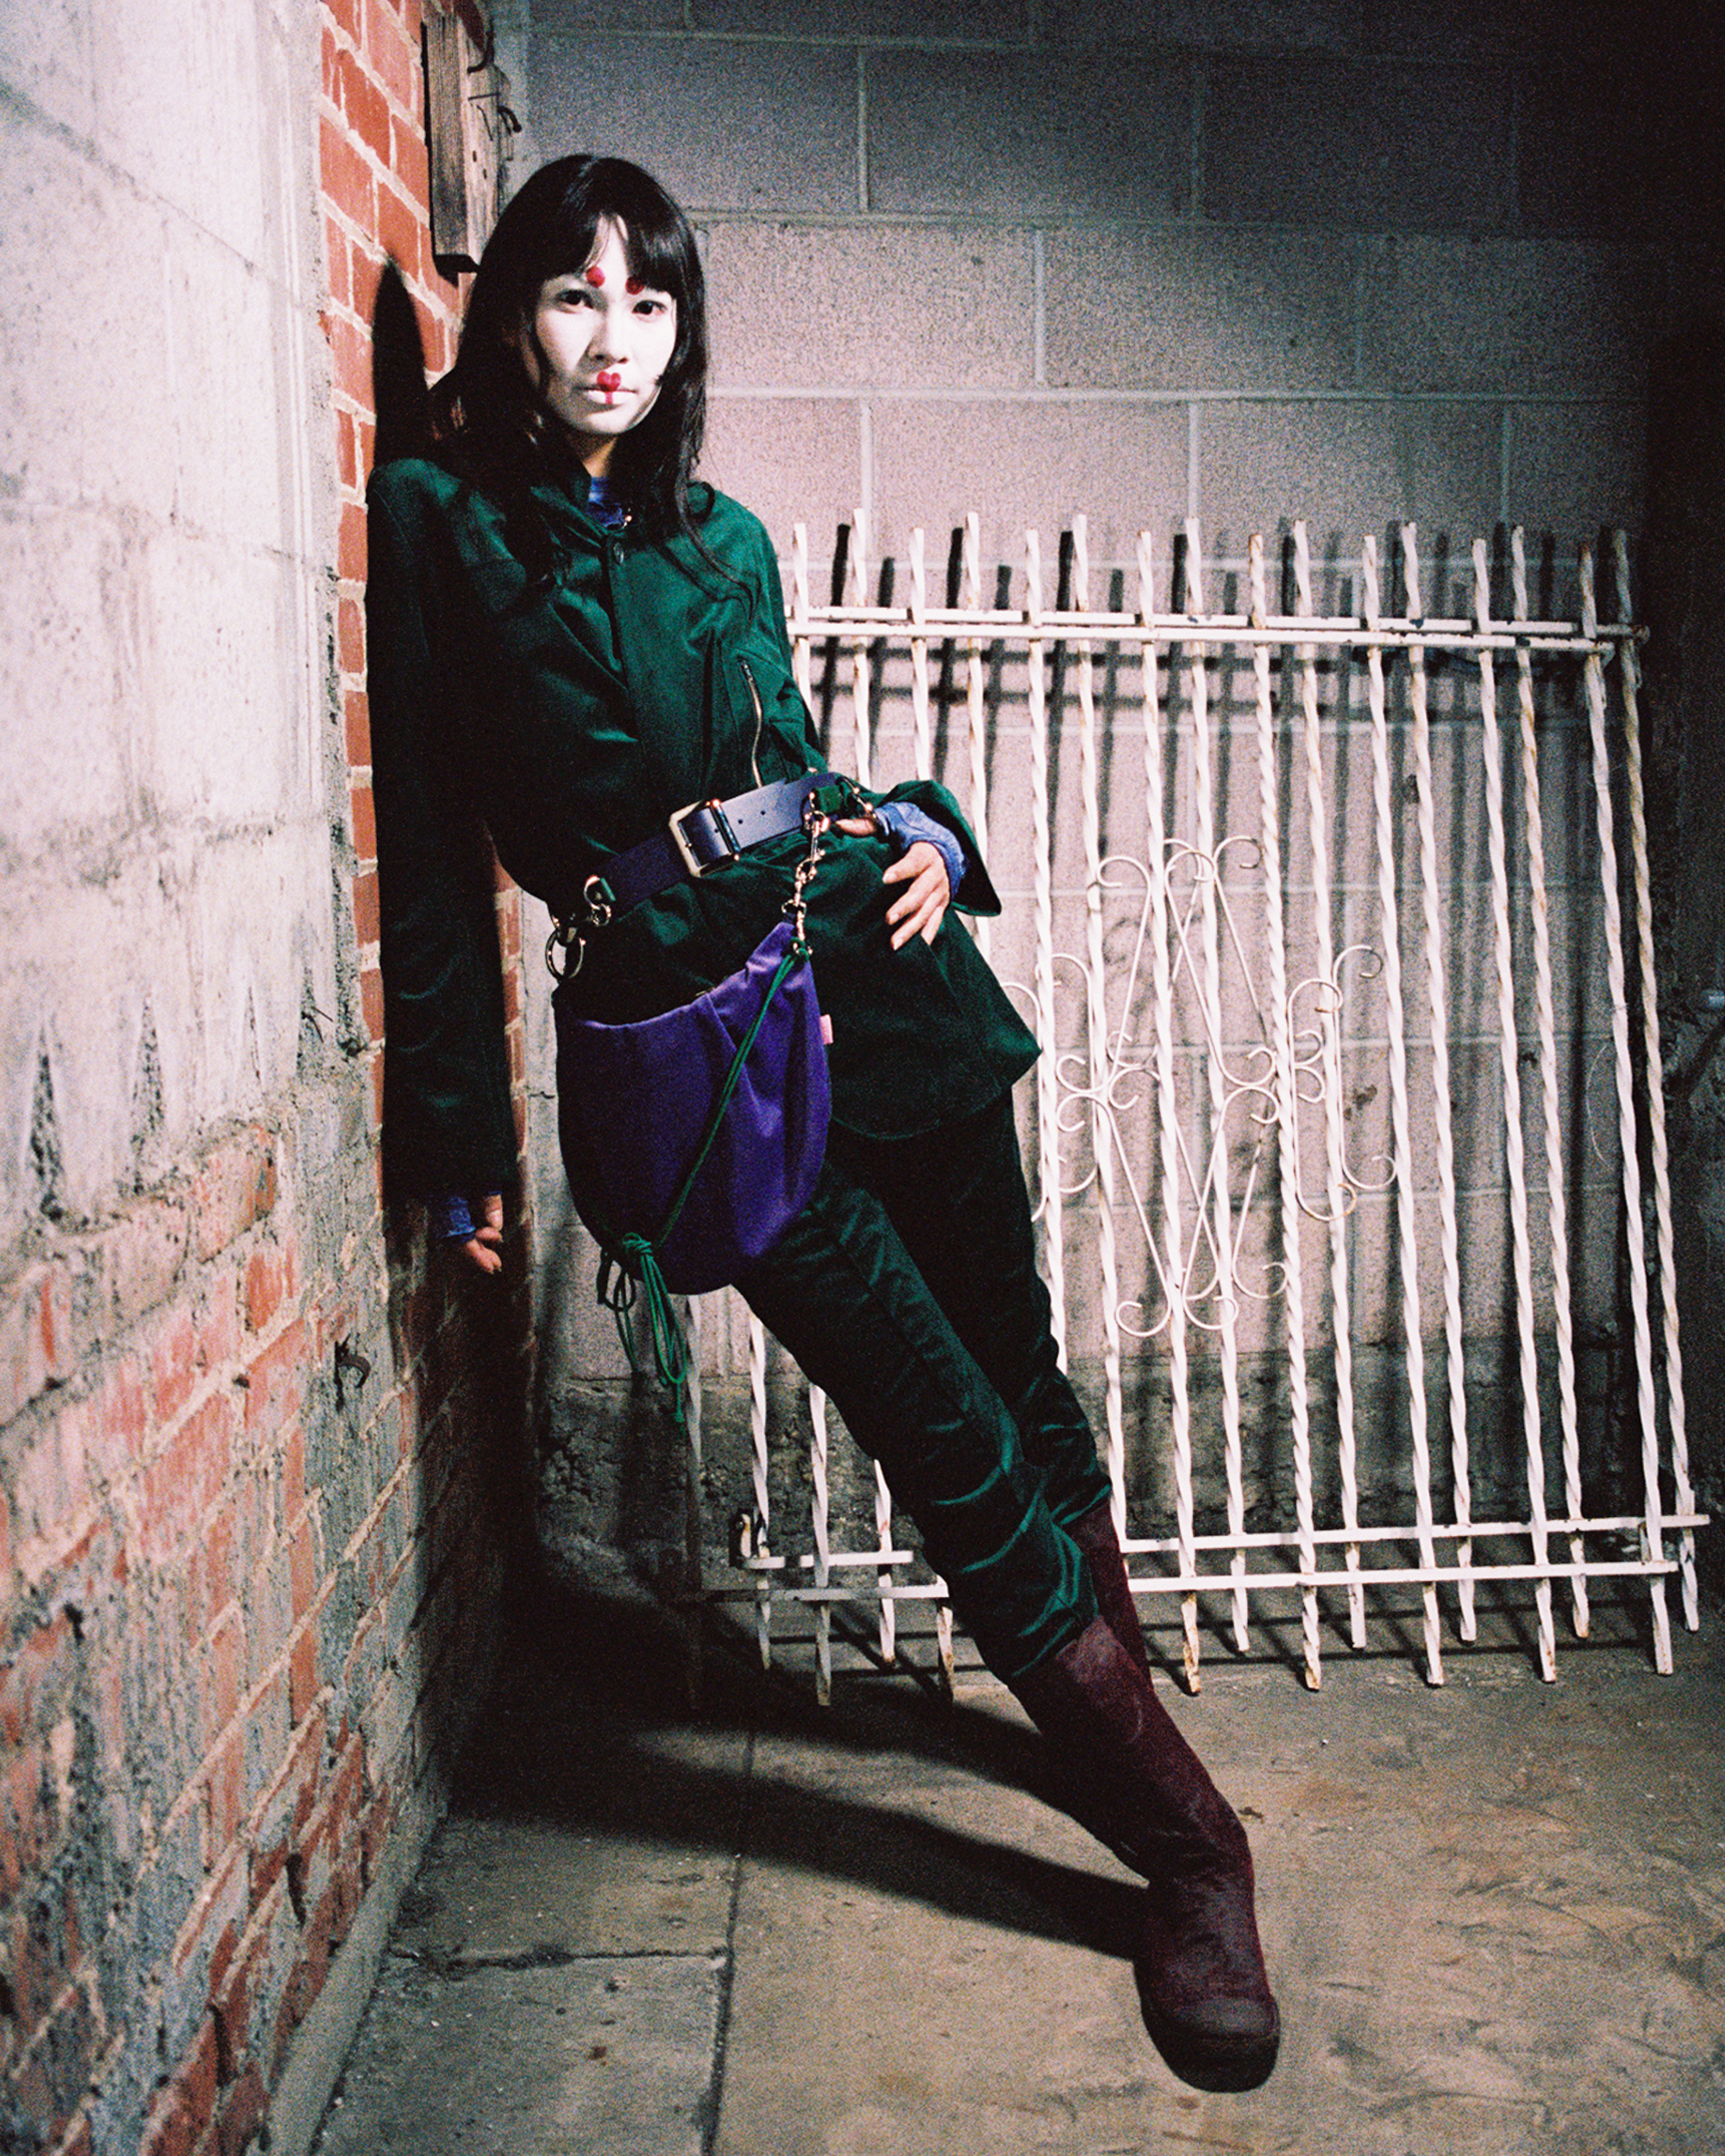 Model with white facepaint with graphic red in a green outfit leaning against a brick wall